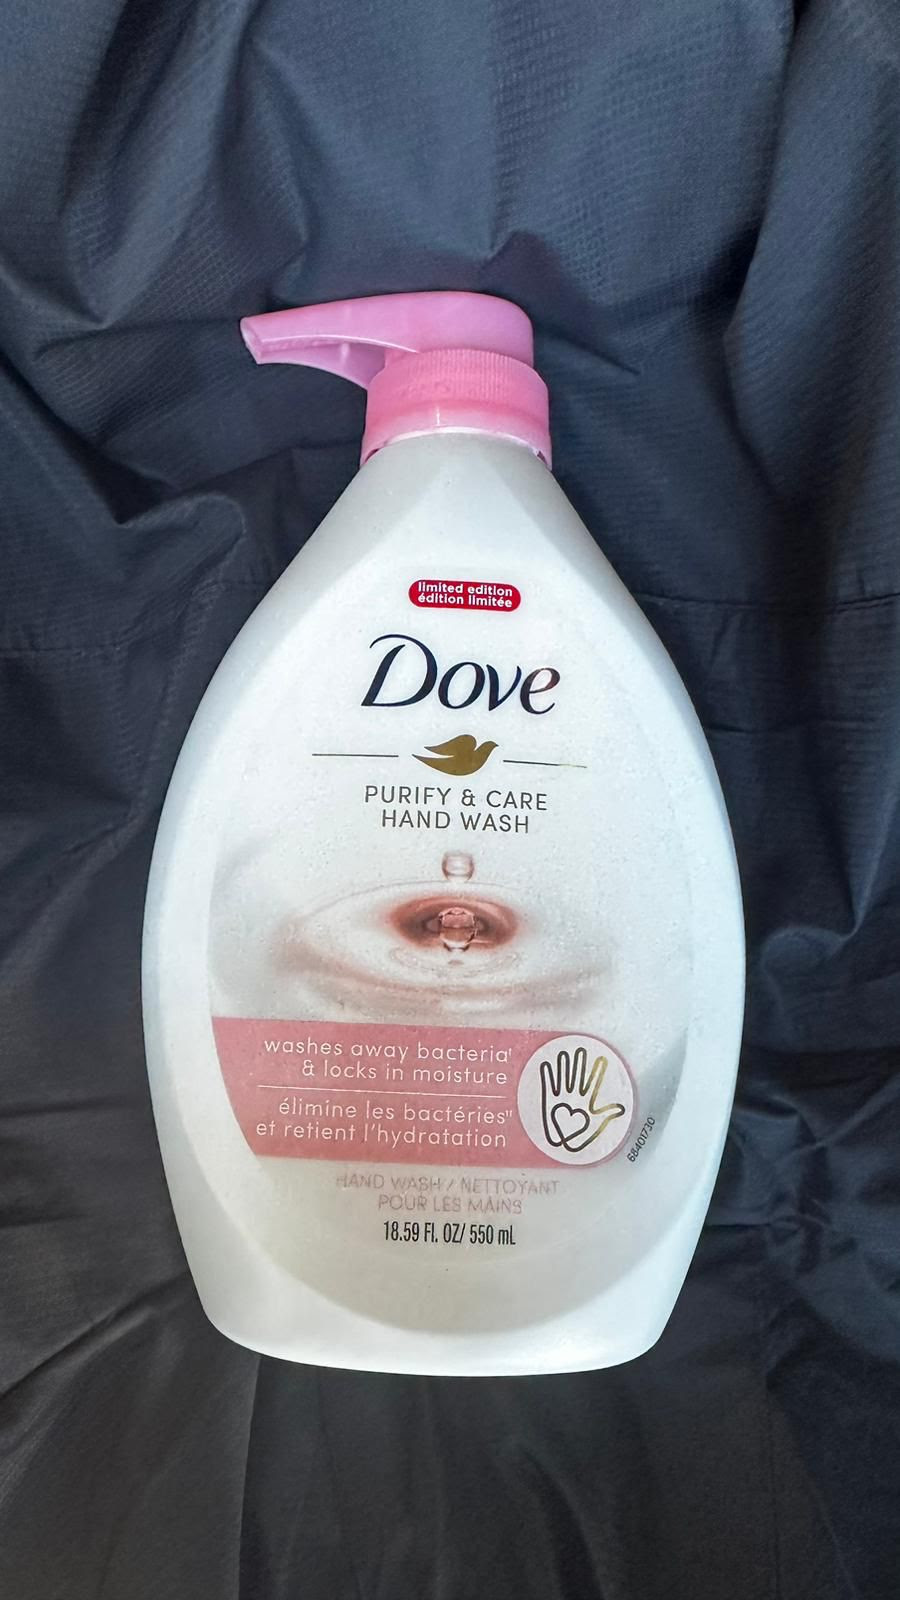 Dove 18.59 oz Purify and Care Hand Wash Soap. 10,000 units. EXW Los Angeles 